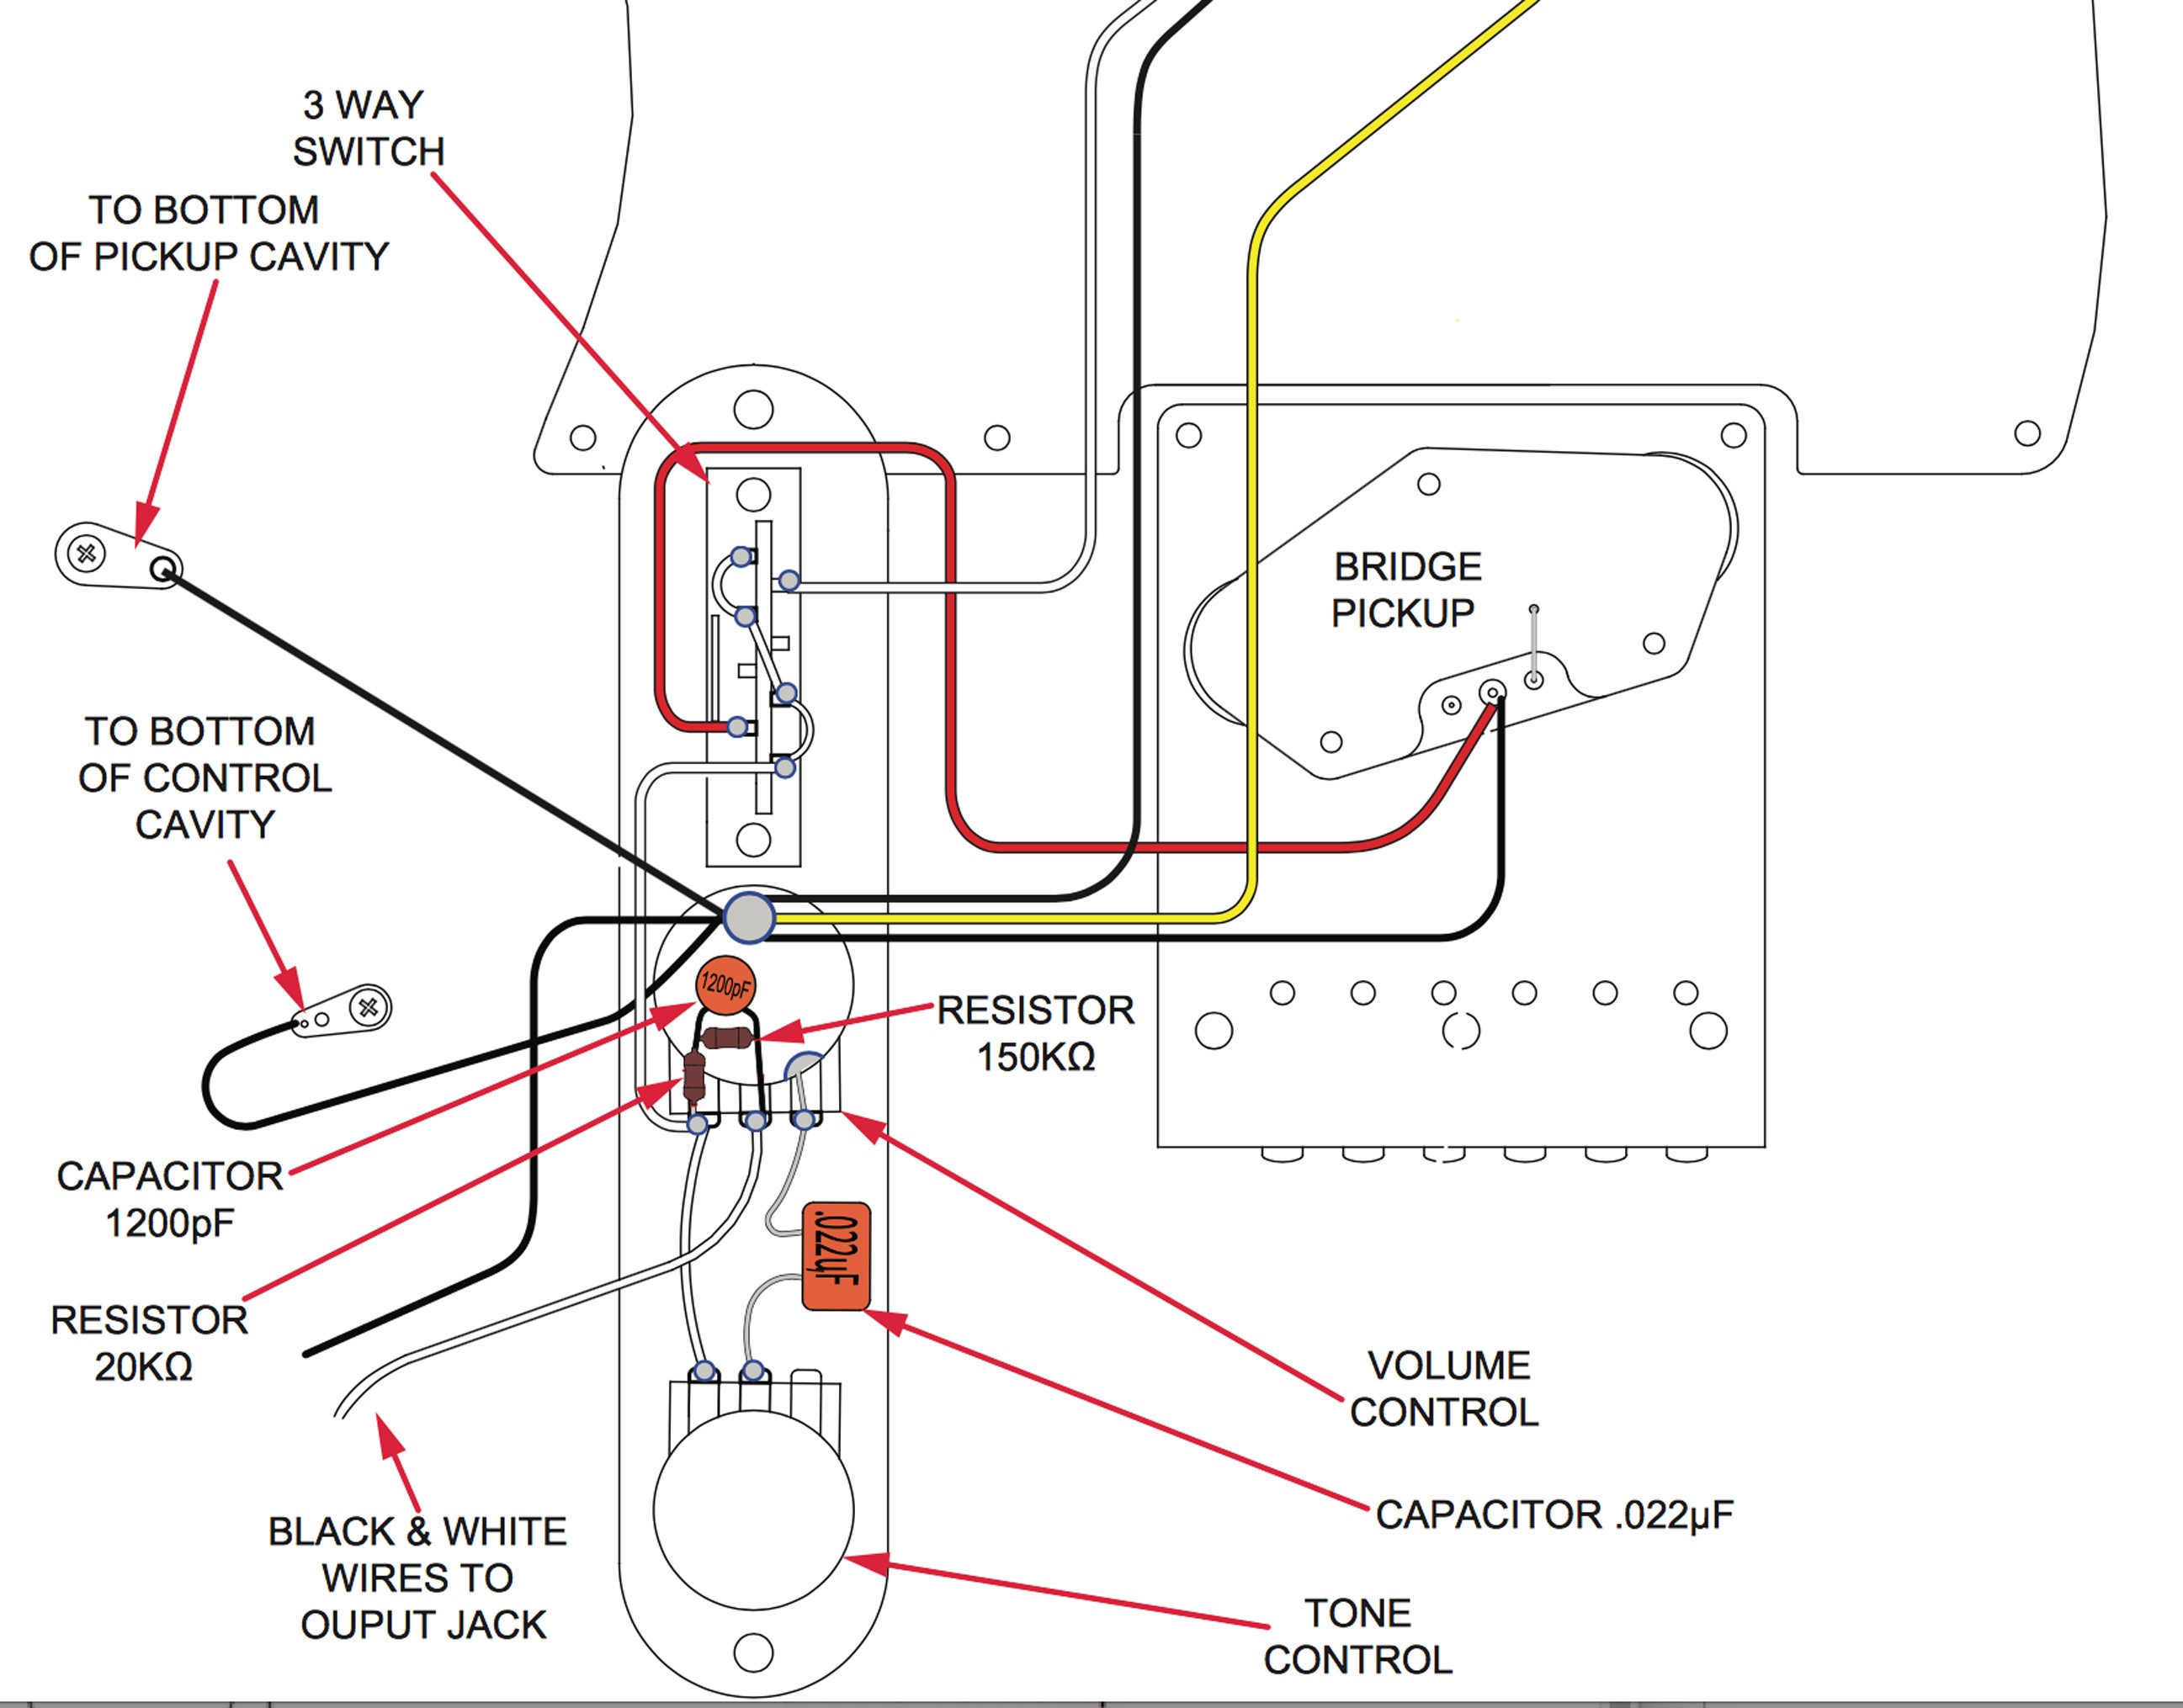 Fender S-1 Switching Diagram How A Treble Bleed Circuit Can Affect Your tone Of Fender S-1 Switching Diagram